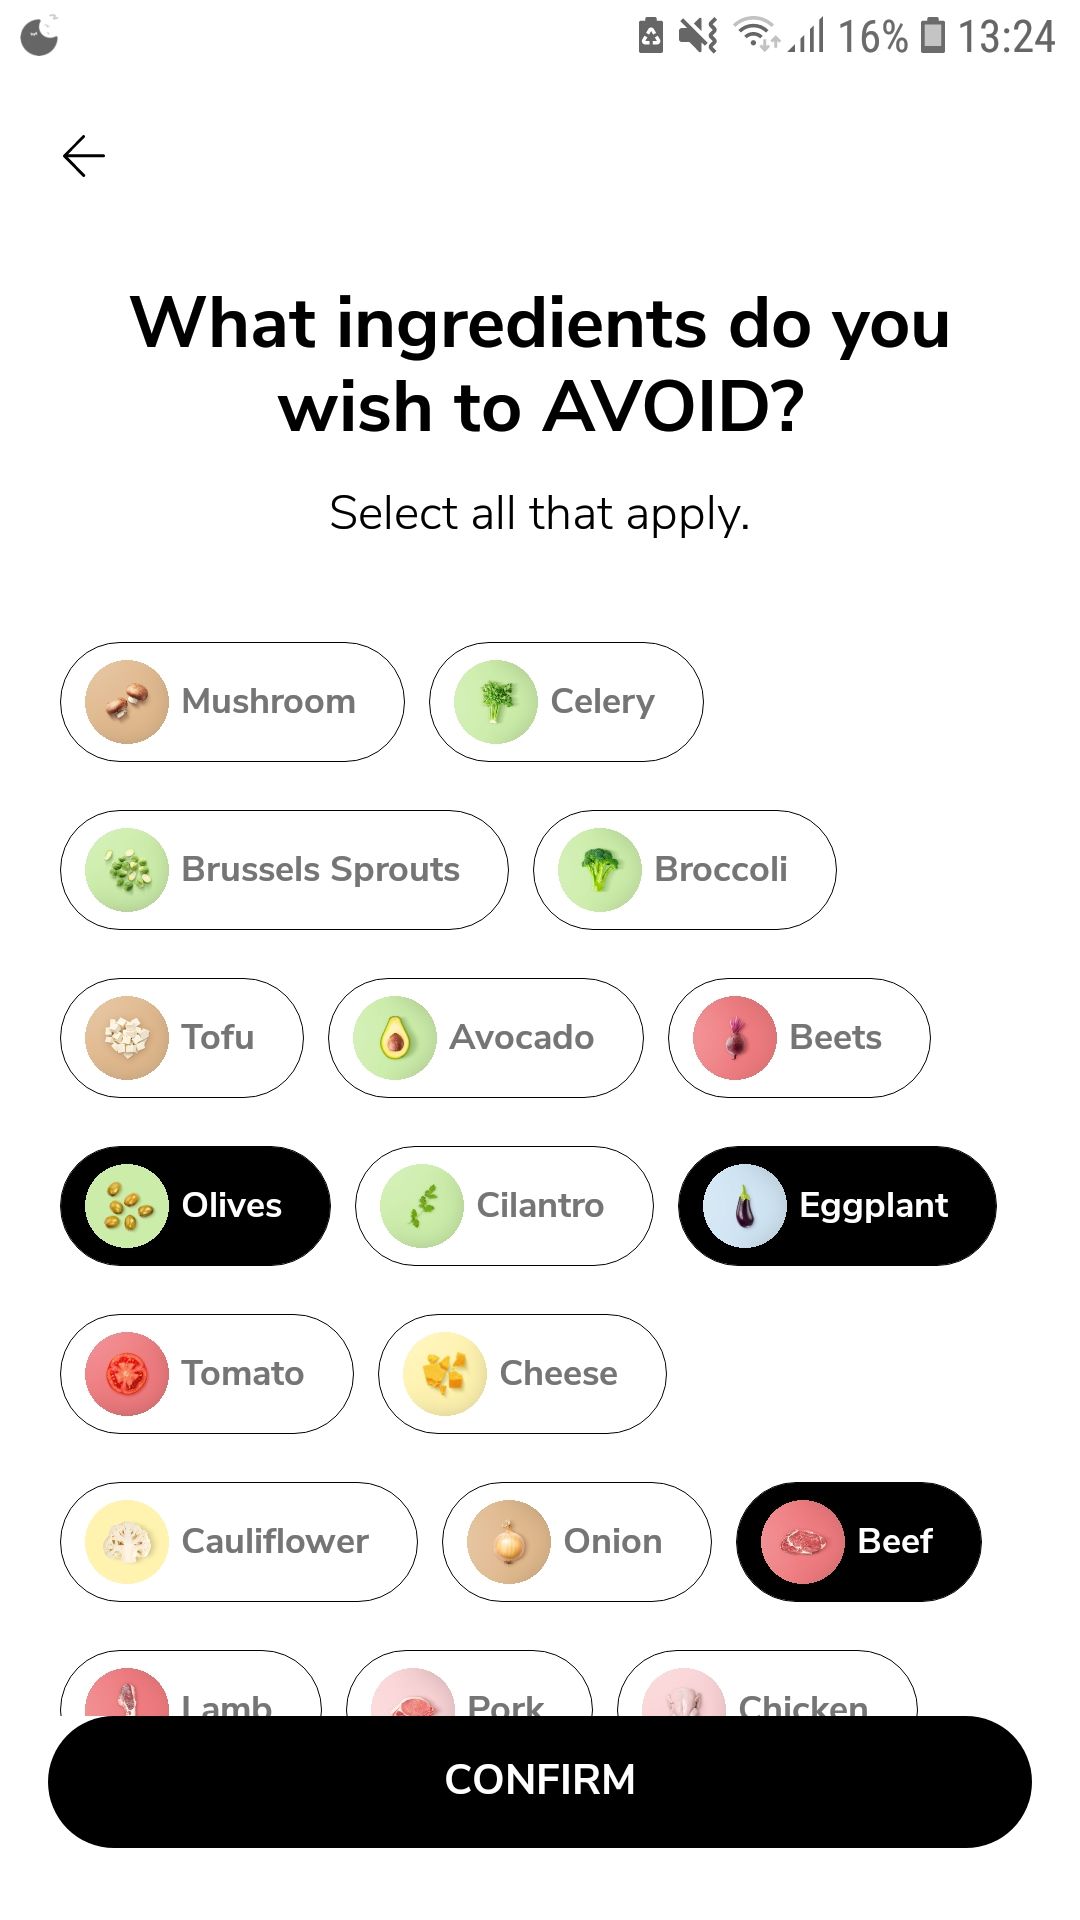 SideChef mobile recipe and meal planning app preferences